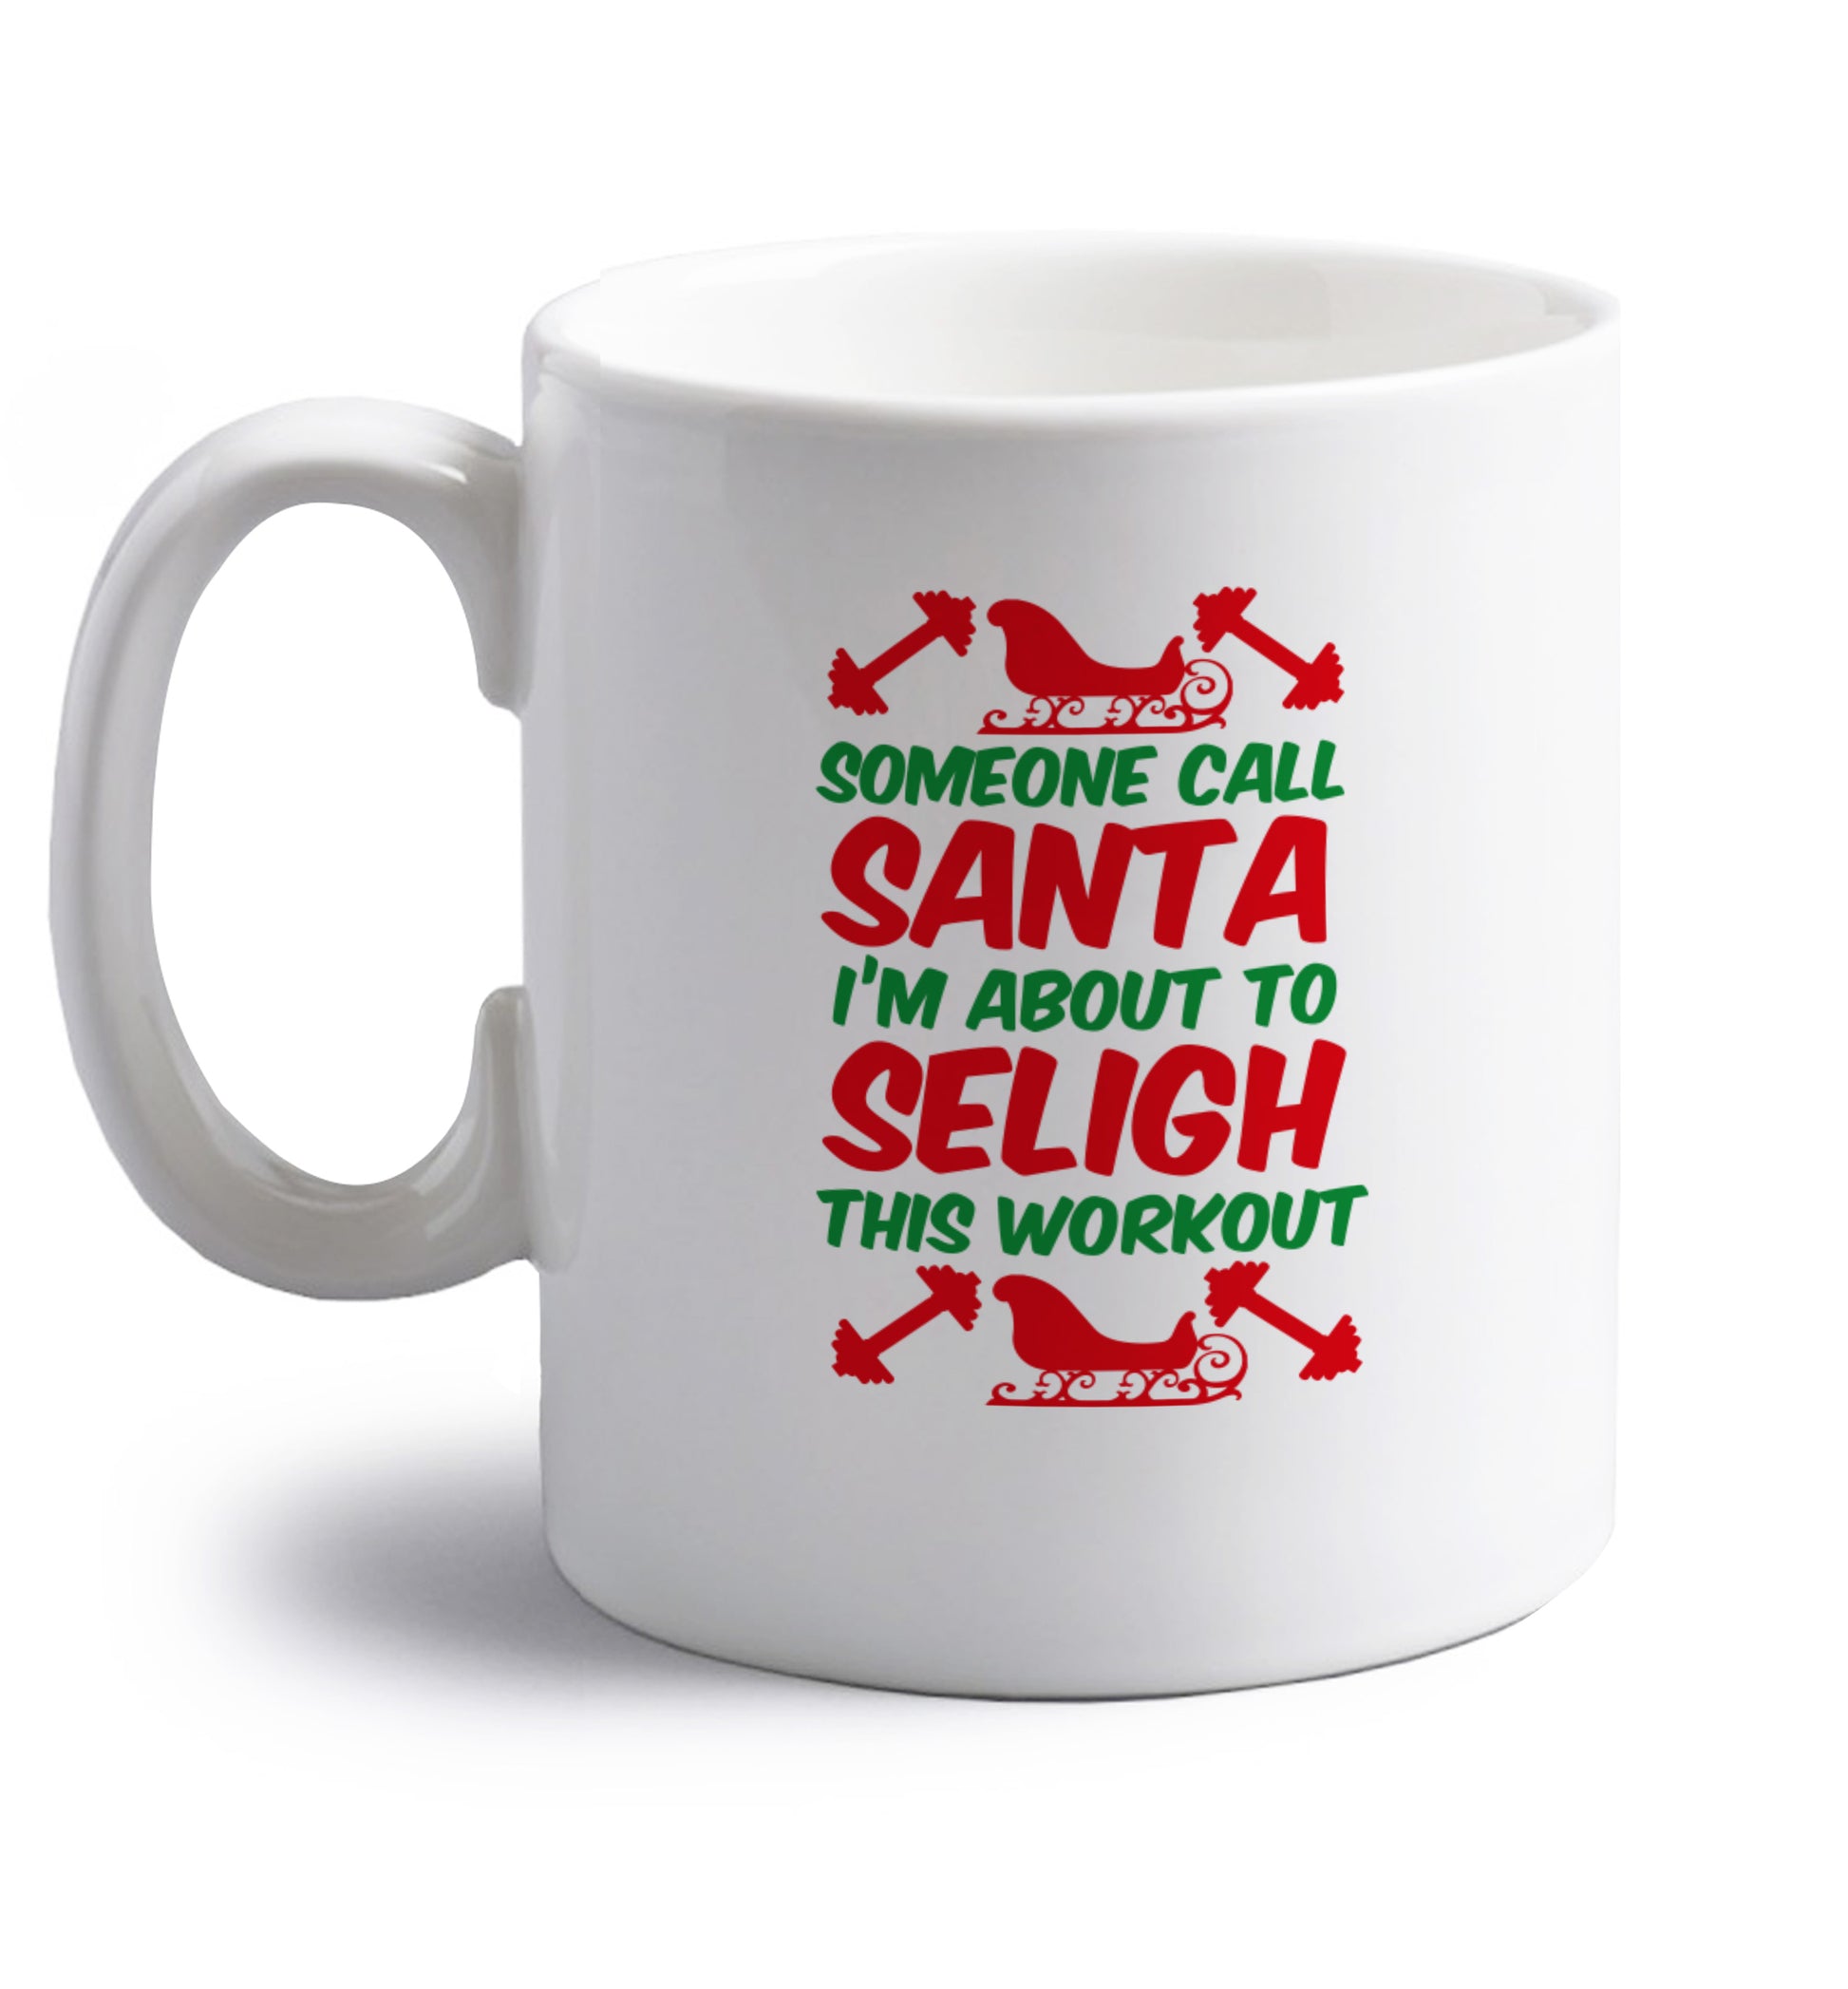 Someone call santa, I'm about to sleigh this workout right handed white ceramic mug 